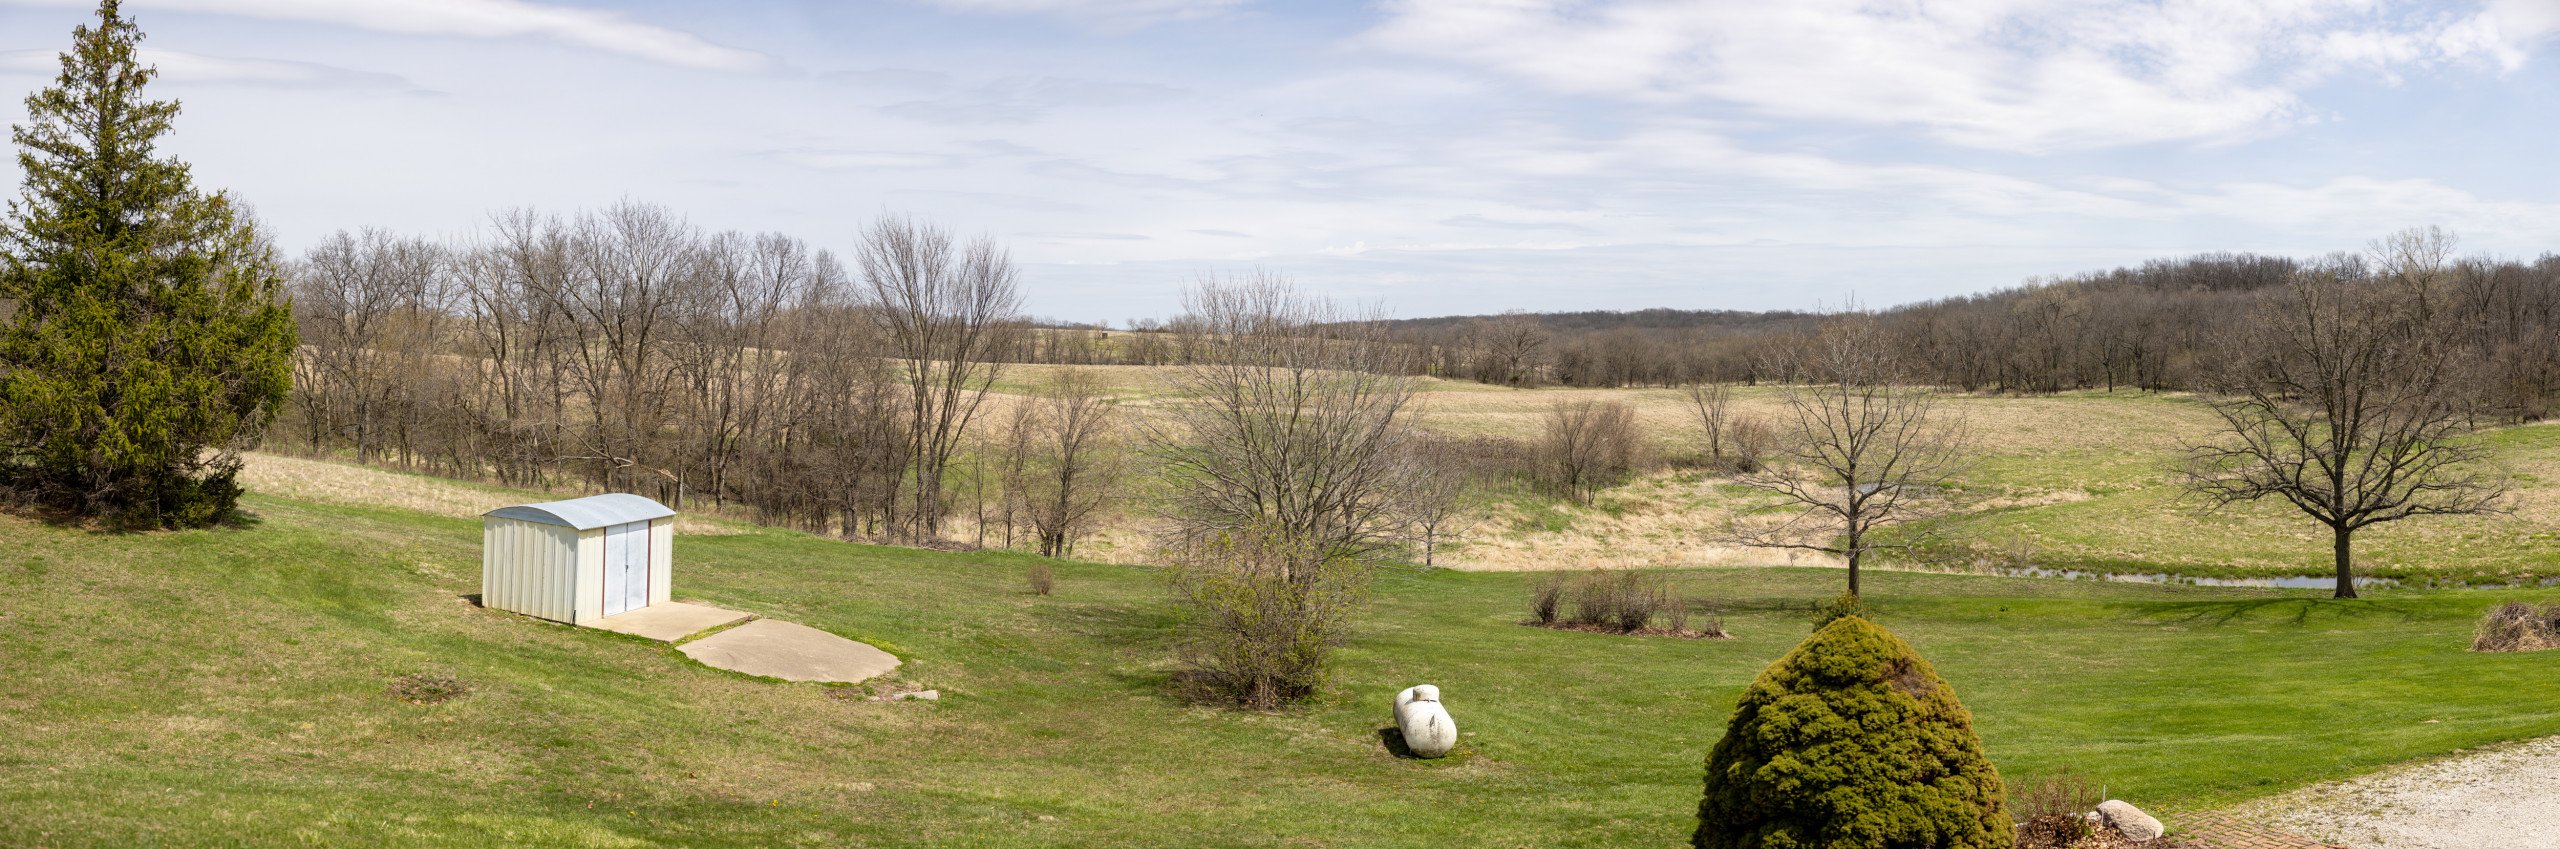 residential-land-clarke-county-iowa-40-acres-listing-number-16152-0M4A7203-Pano-1.jpg